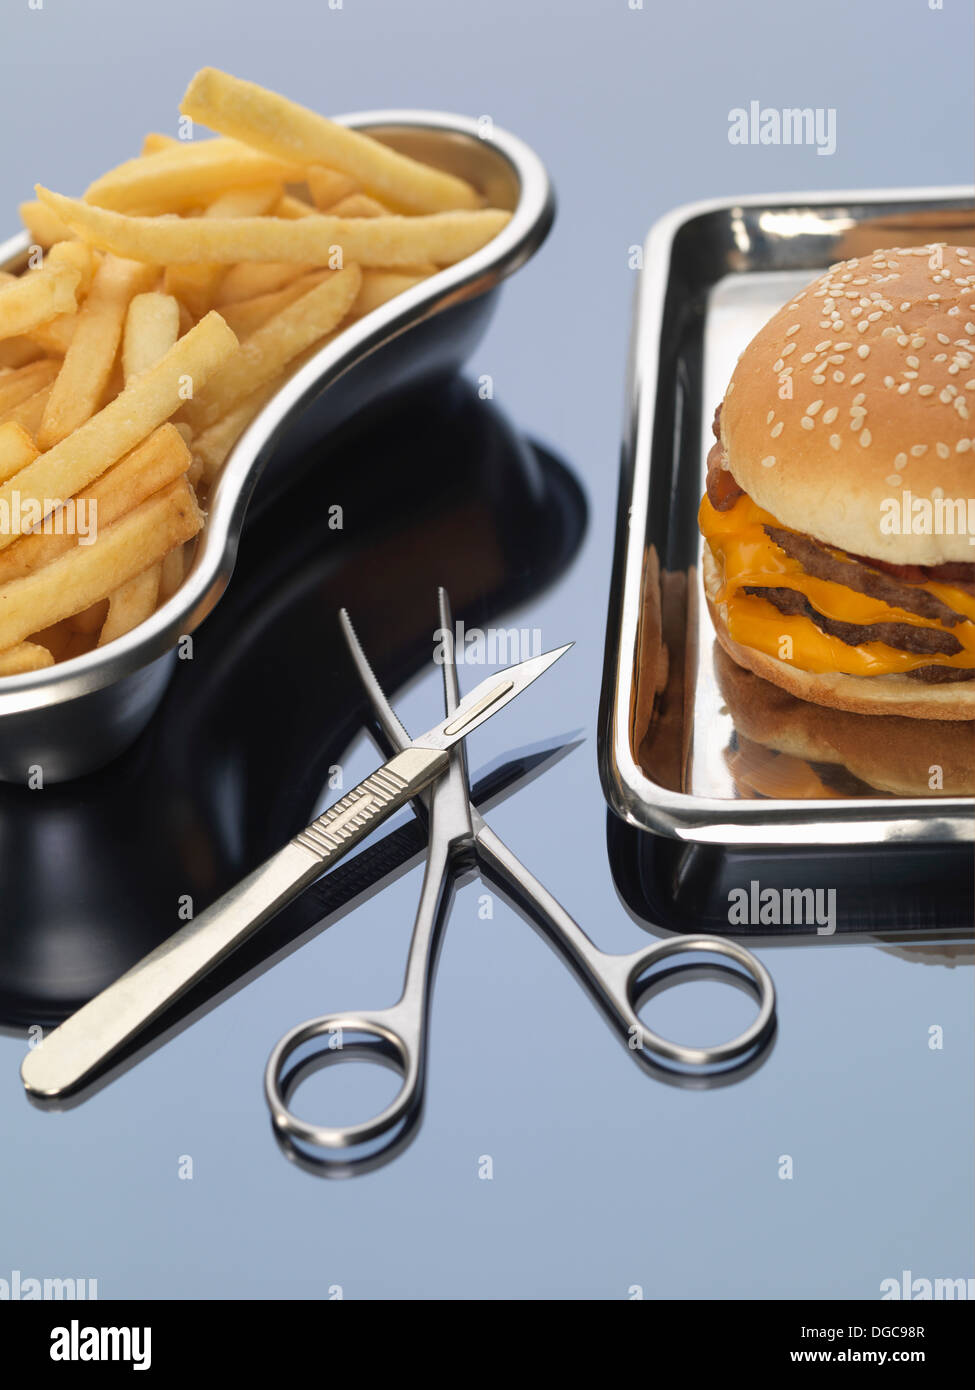 Burger and fries sitting in surgical trays illustrating unhealthy diet Stock Photo